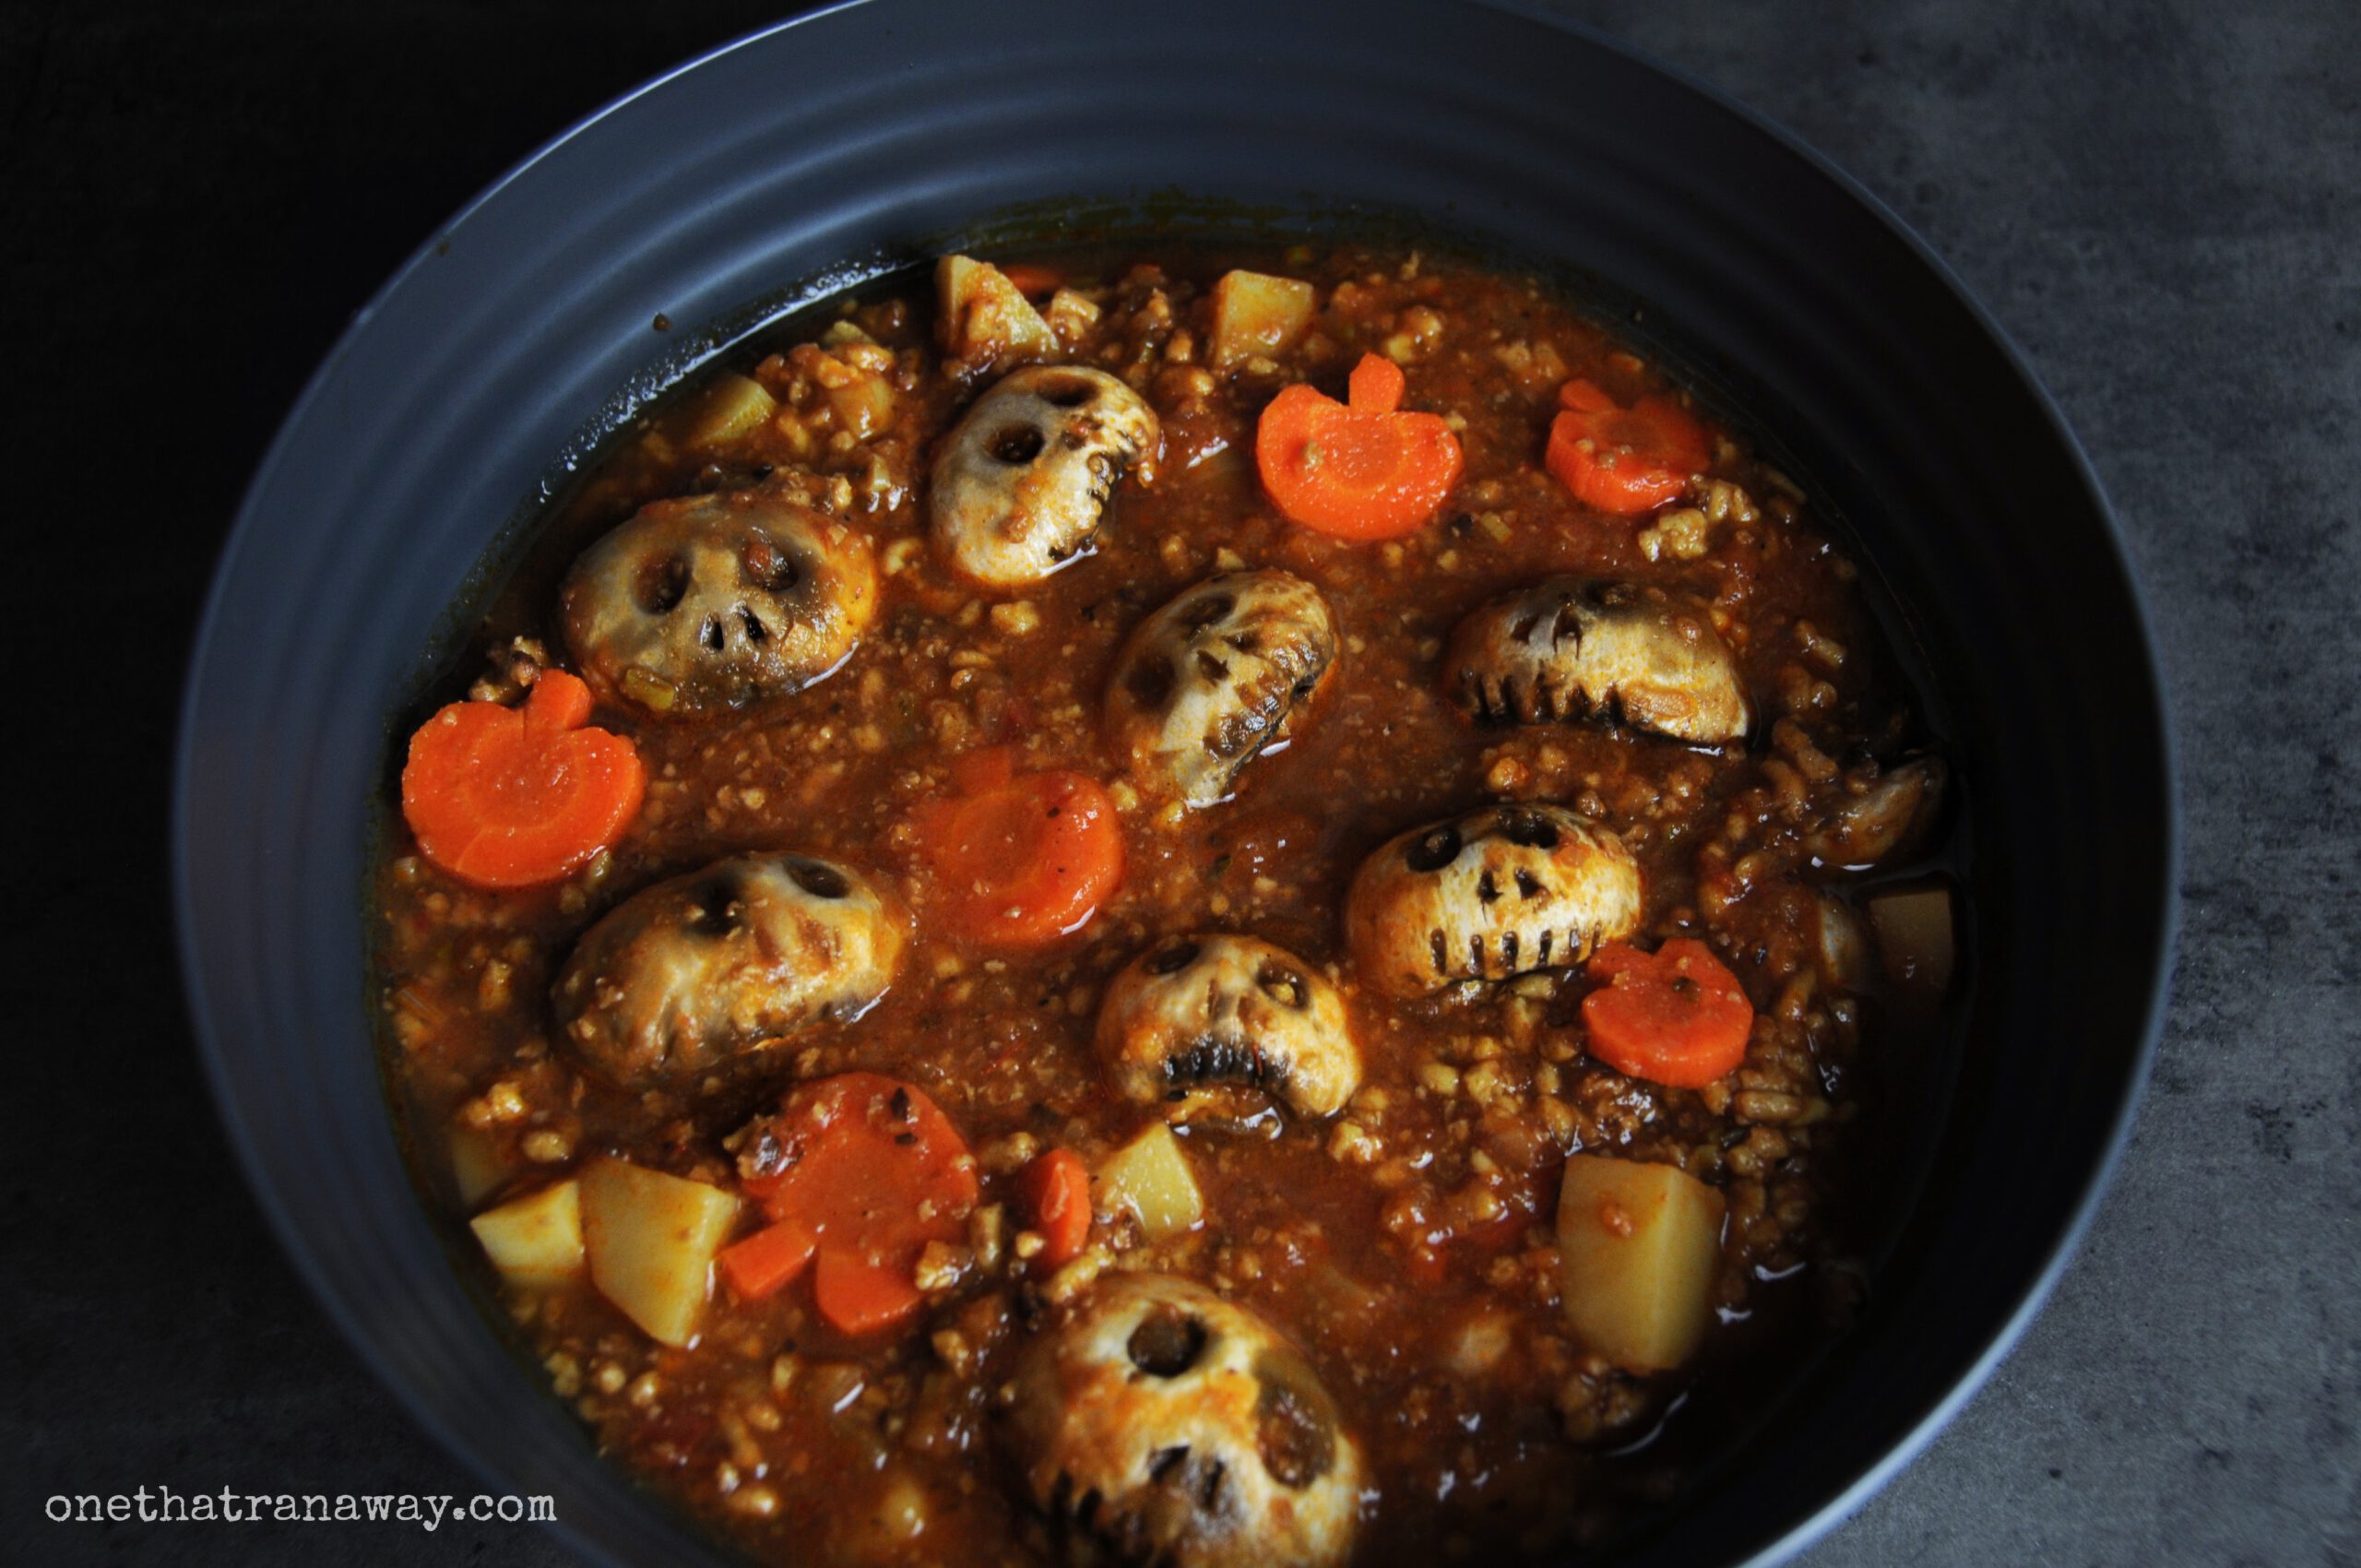 witches brew stew with skull shaped mushrooms and carrots in a dark grey bowl